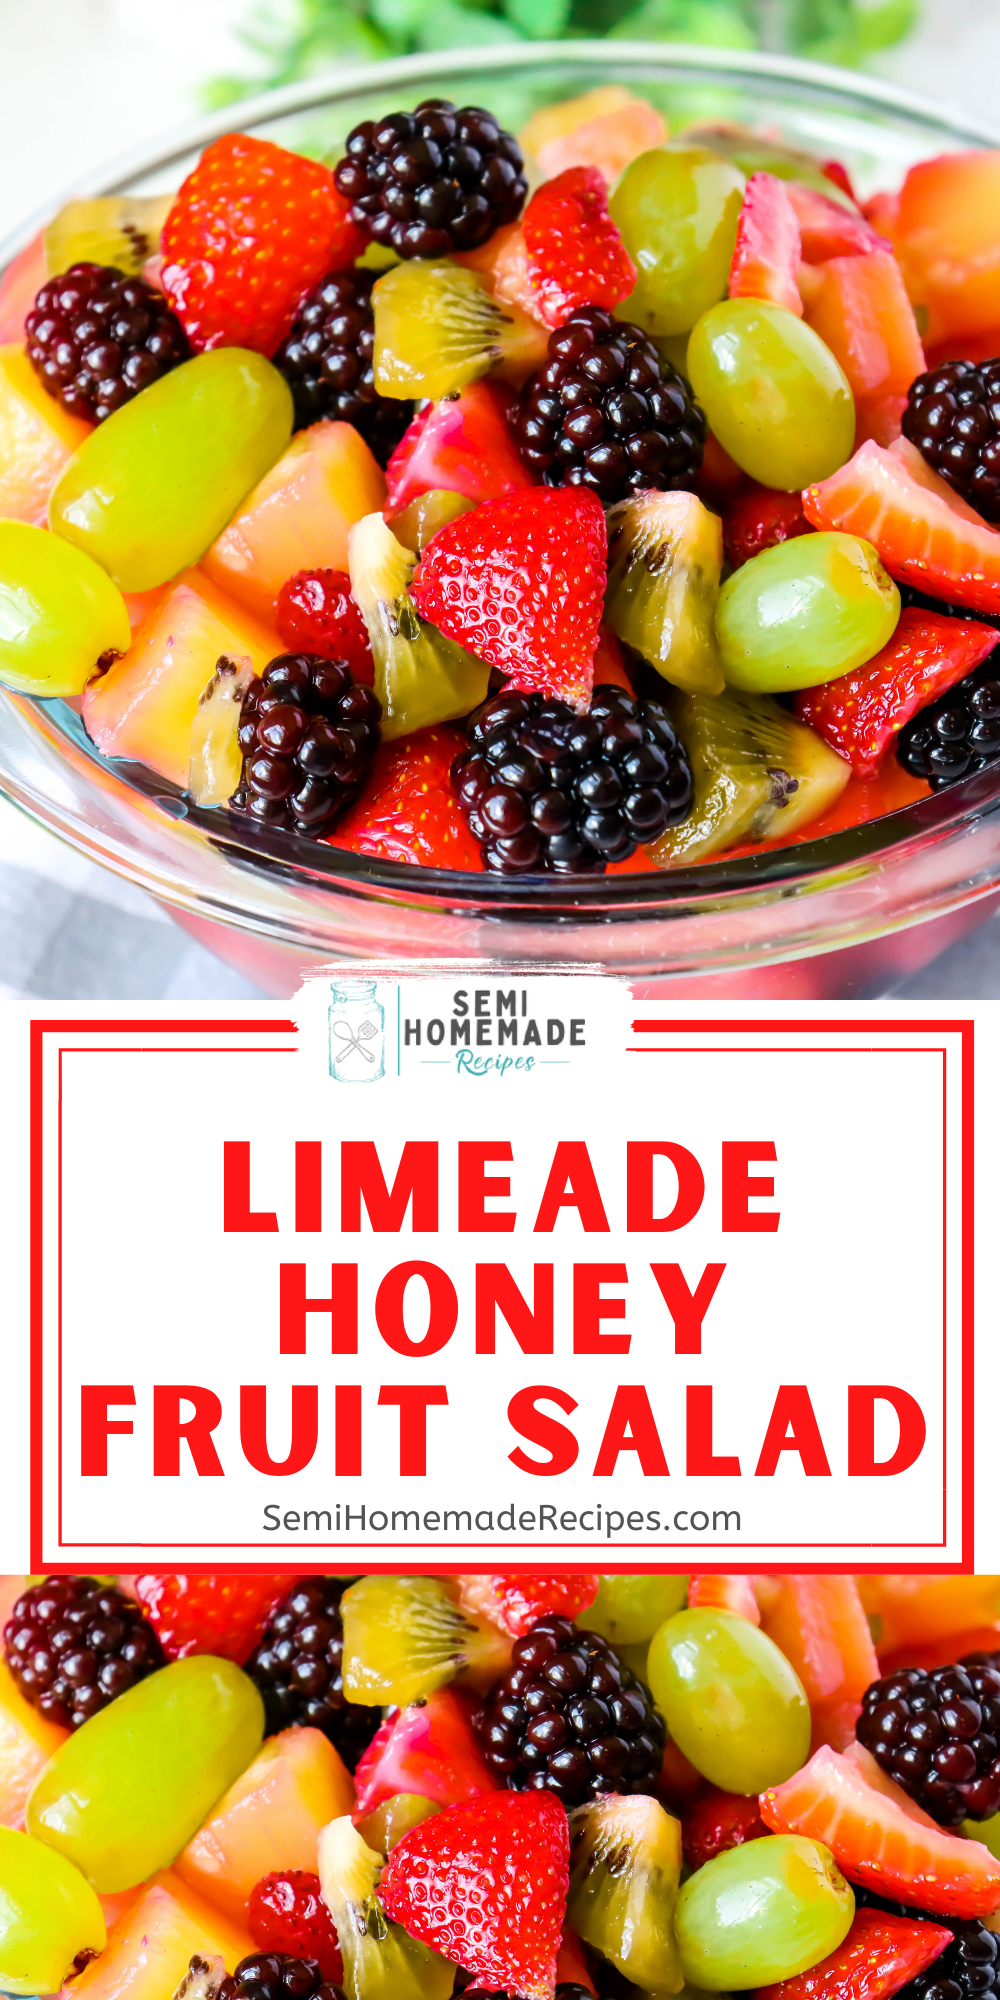 Limeade Honey Fruit Salad - This fresh, sweet and sour mixed fruit salad is perfect for cooling off on a hot summer day!